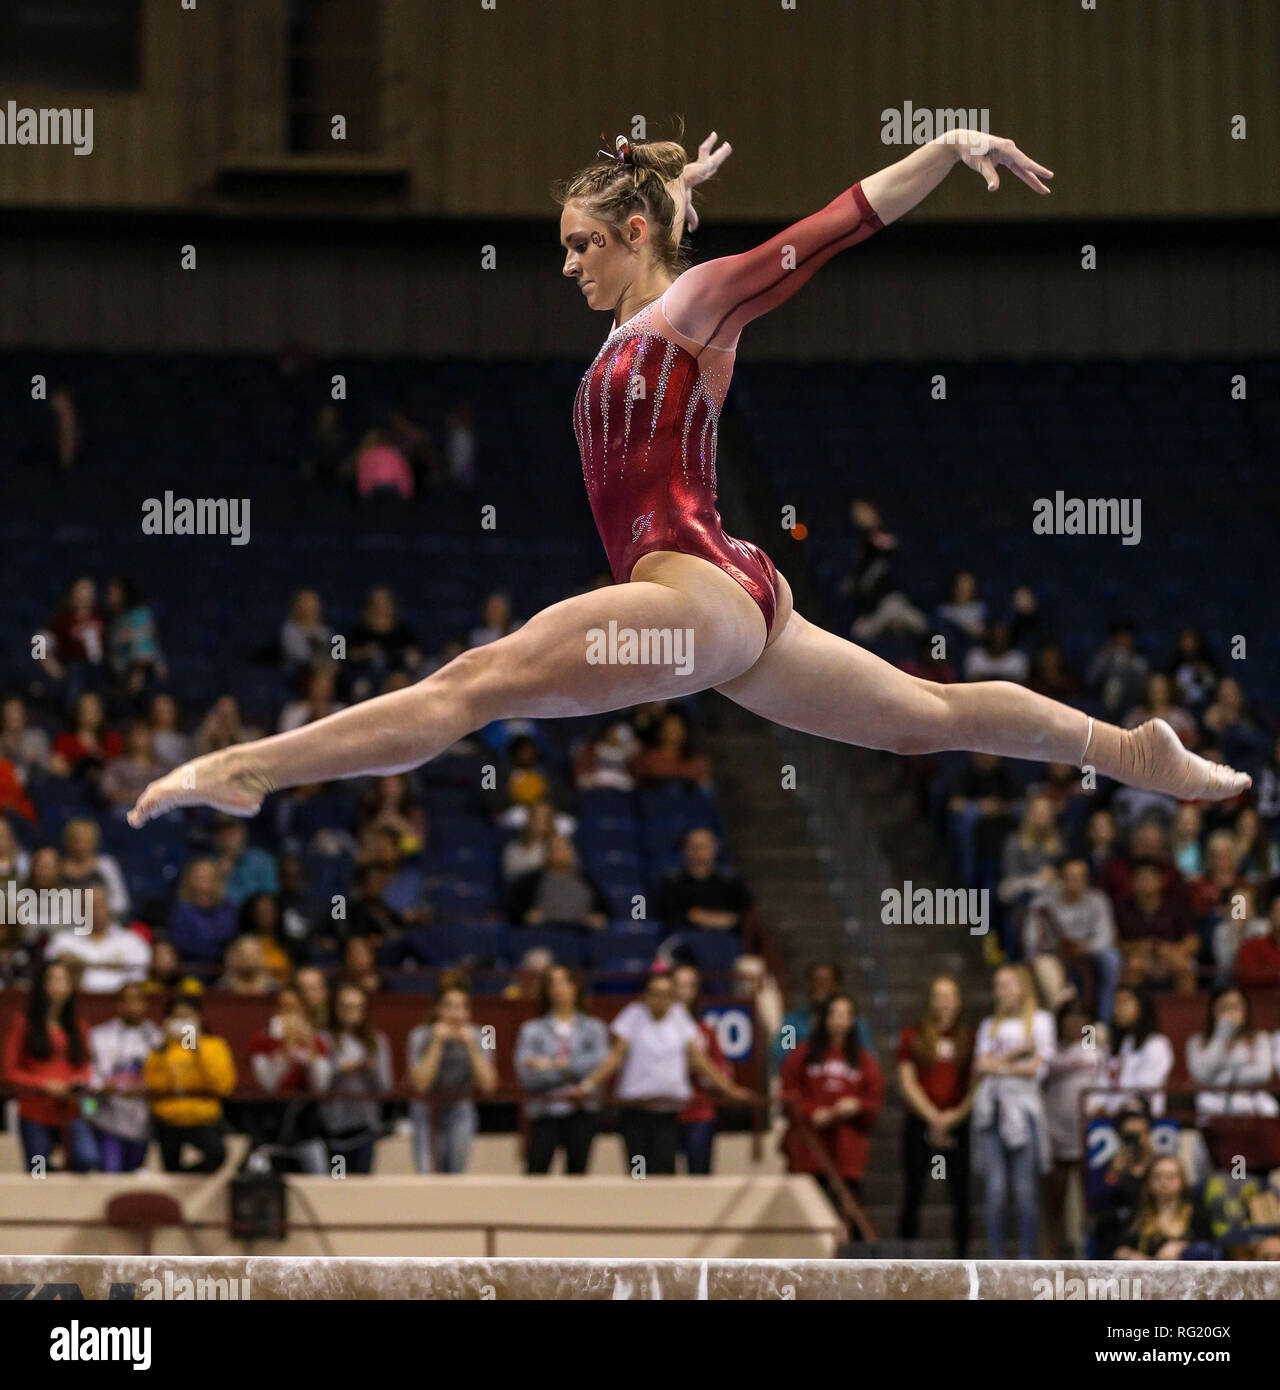 Fort Worth, Texas, USA. 26th Jan, 2019. Oklahoma's Carly Woodard performs on the balance beam during the Metroplex Challenge NCAA gymnastics meet at the Fort Worth Convention Center in Fort Worth, Texas. Kyle Okita/CSM/Alamy Live News Stock Photo